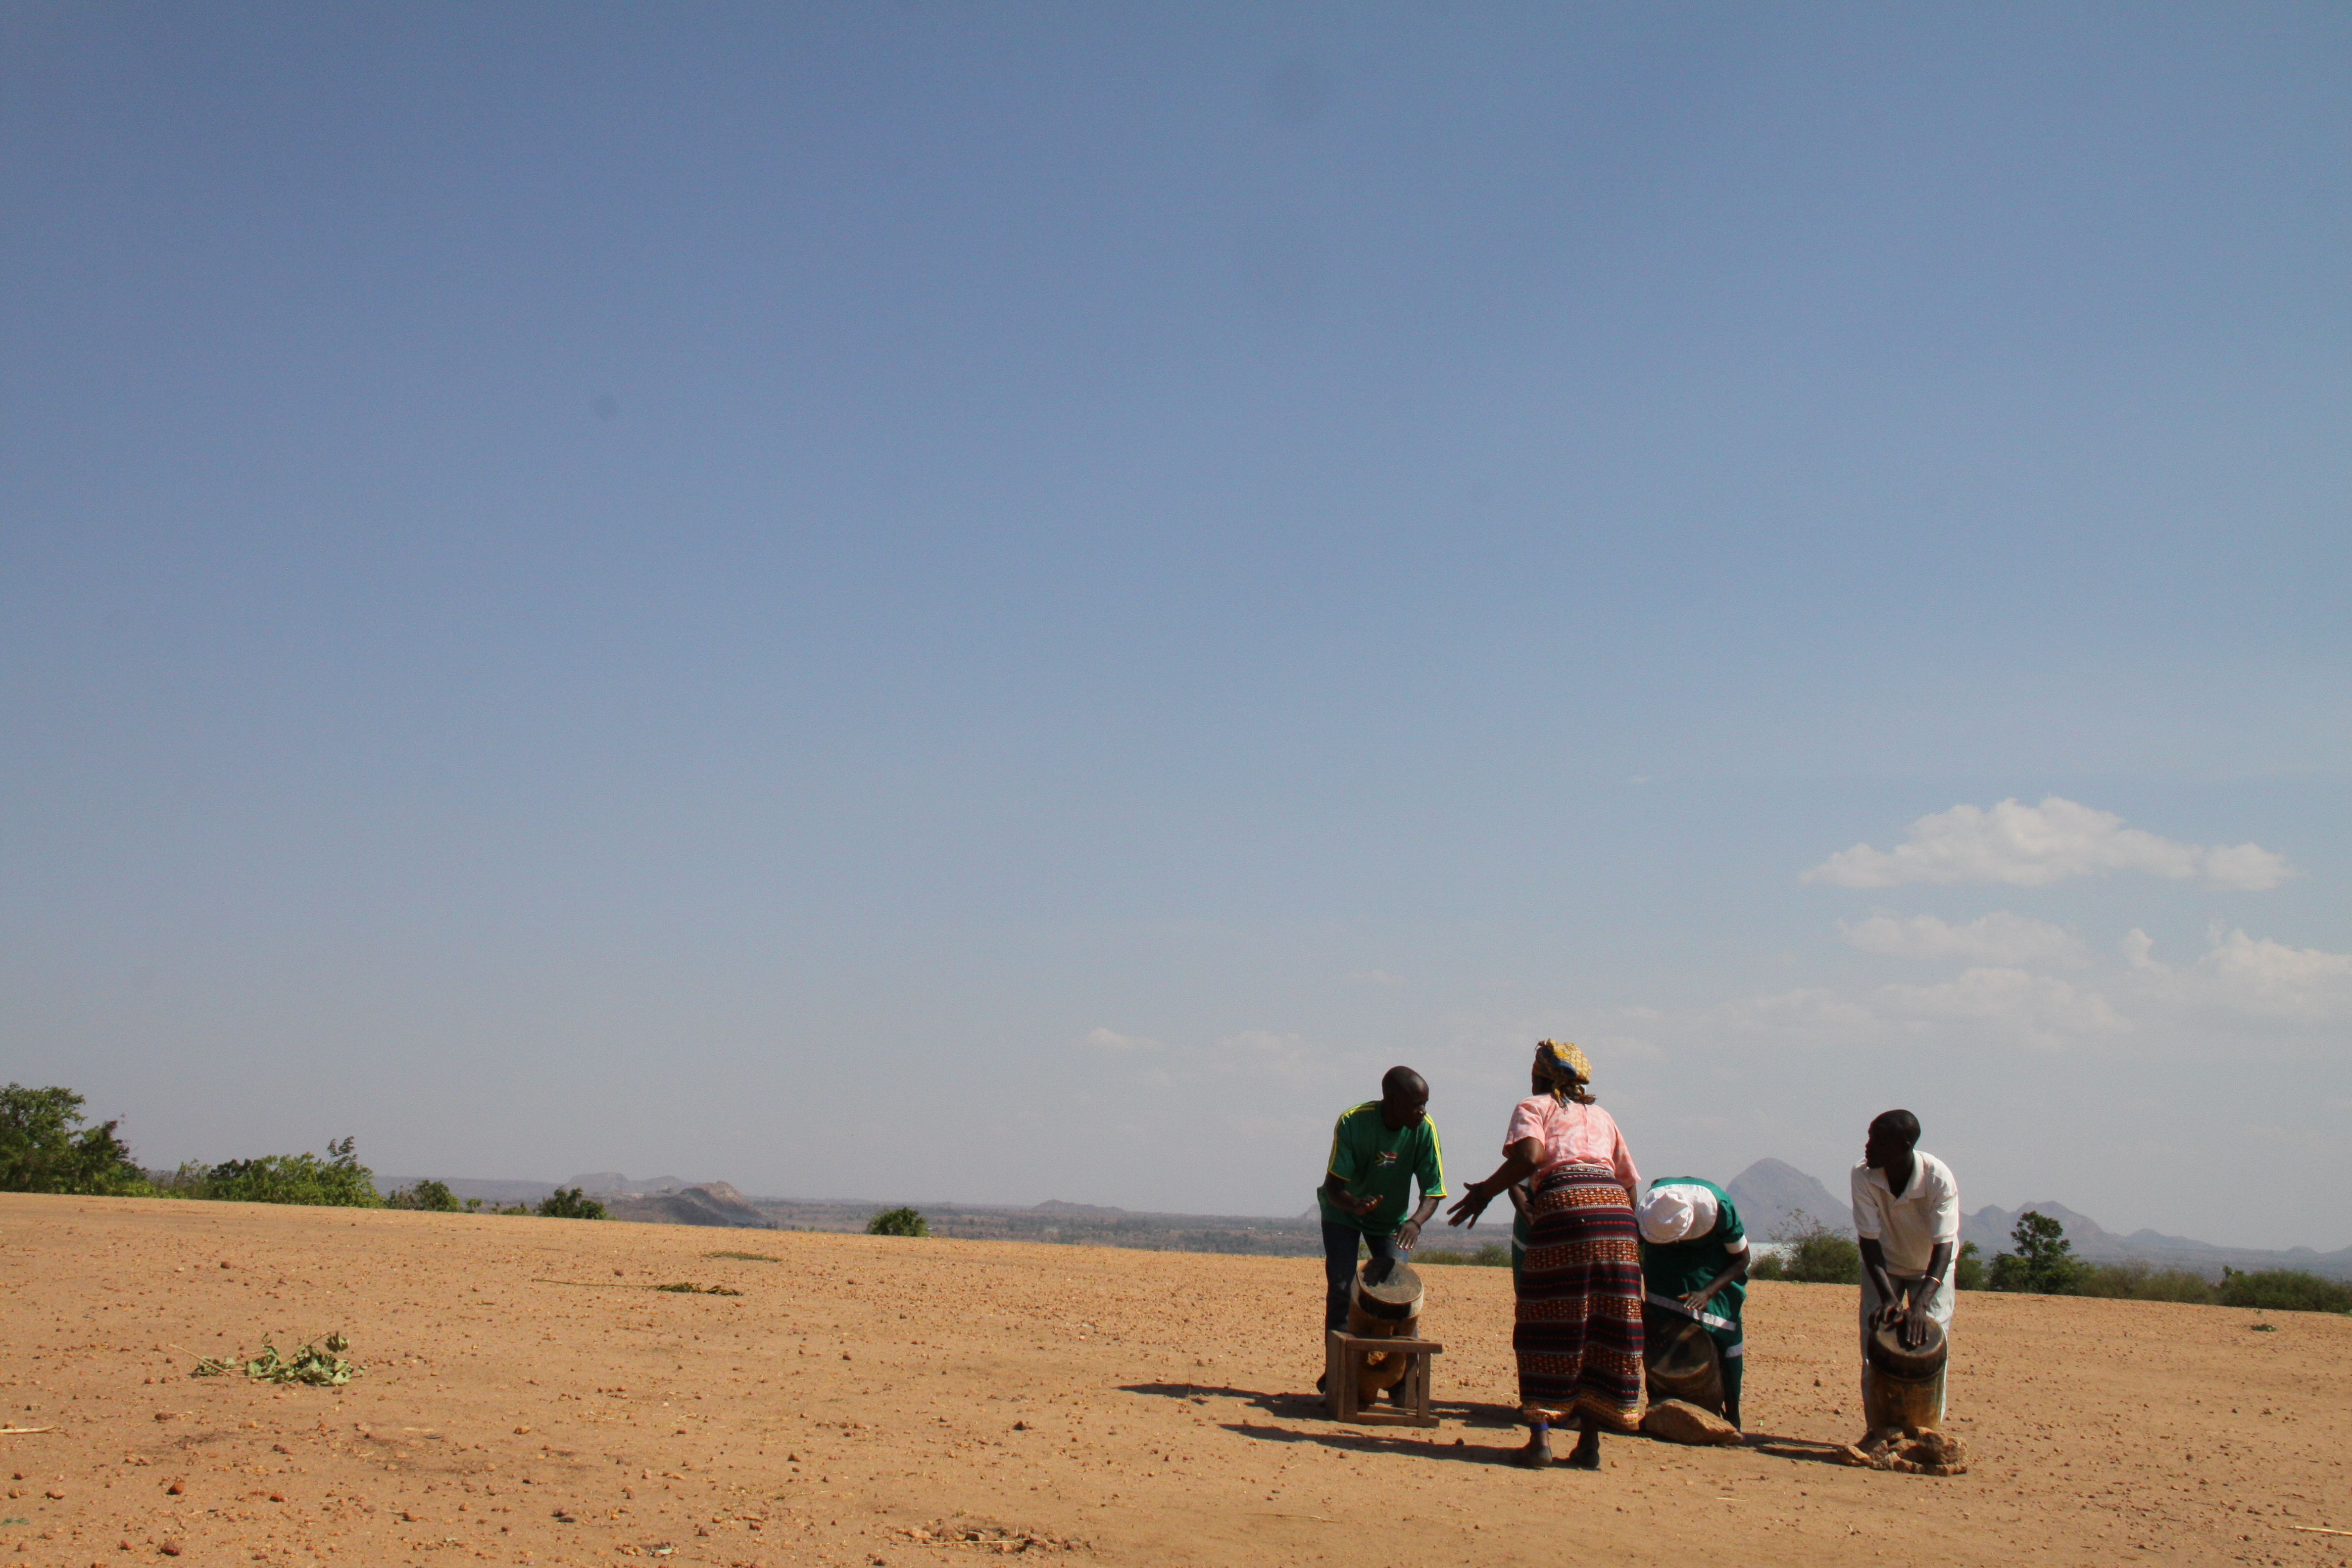 Drummers and a singer perform against the backdrop of the beautiful, dry Malawian countryside. Photograph by Ingrid Ytre-Arne.